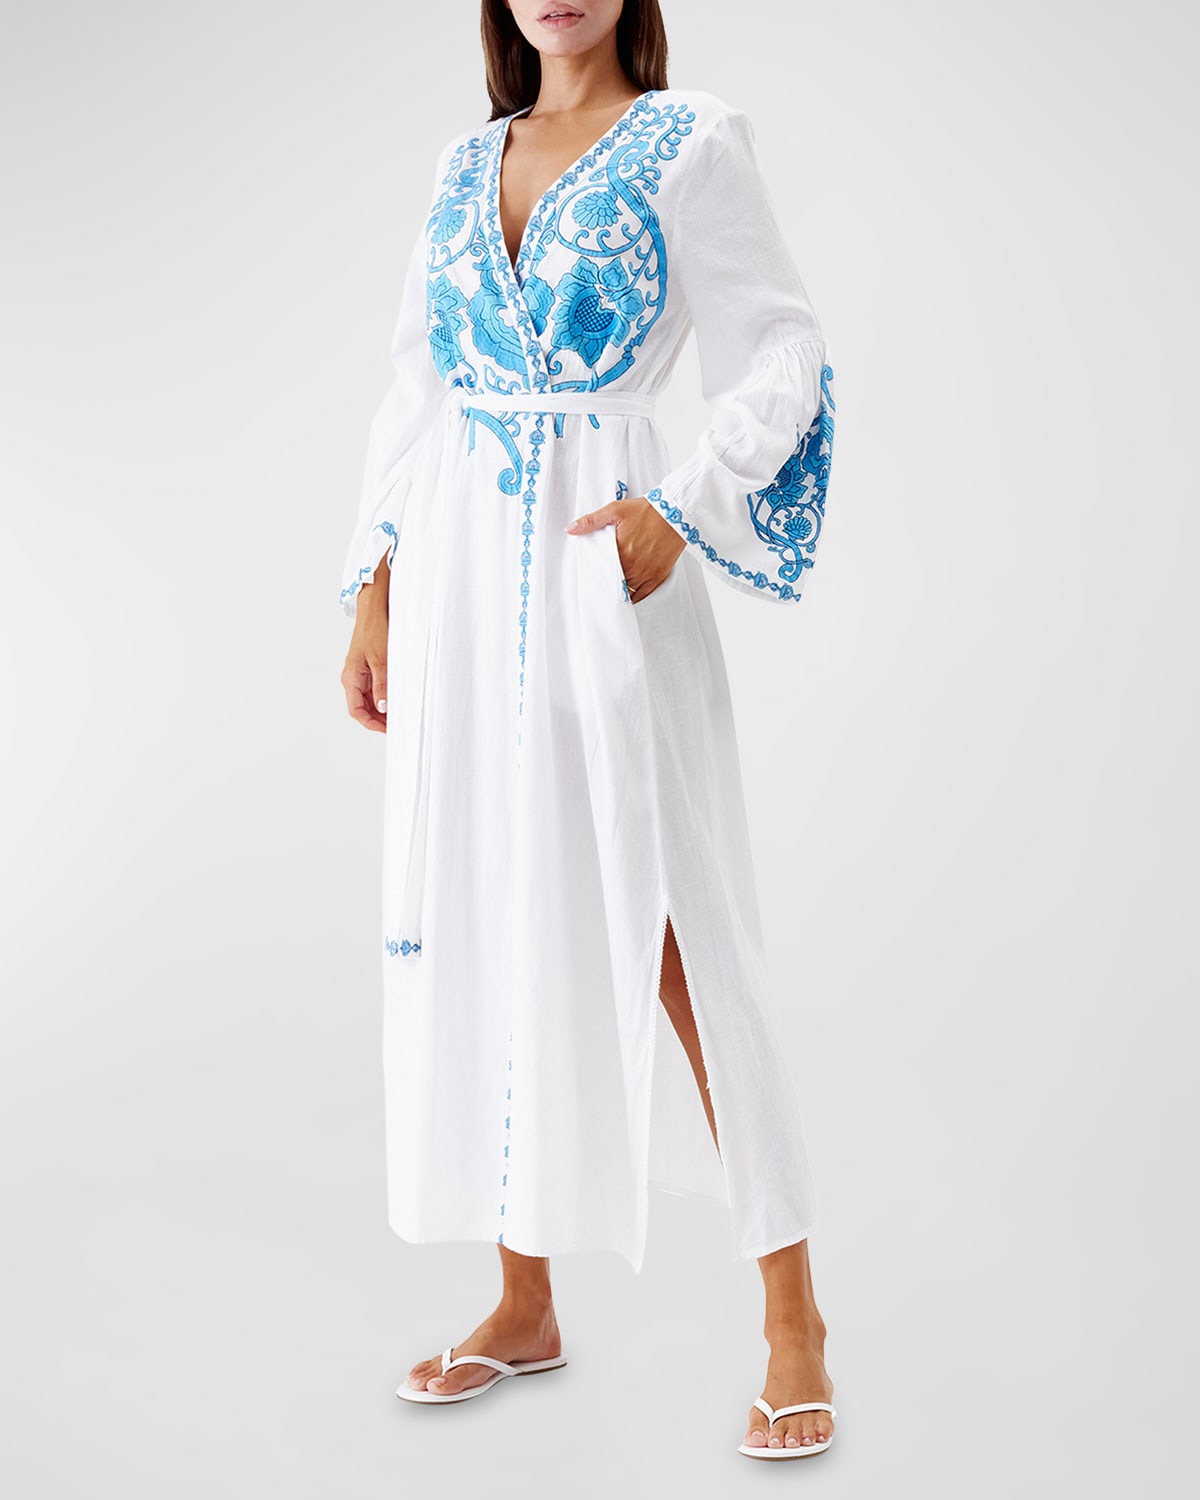 Shop Melissa Odabash Romilly Printed Caftan Coverup In White/blue